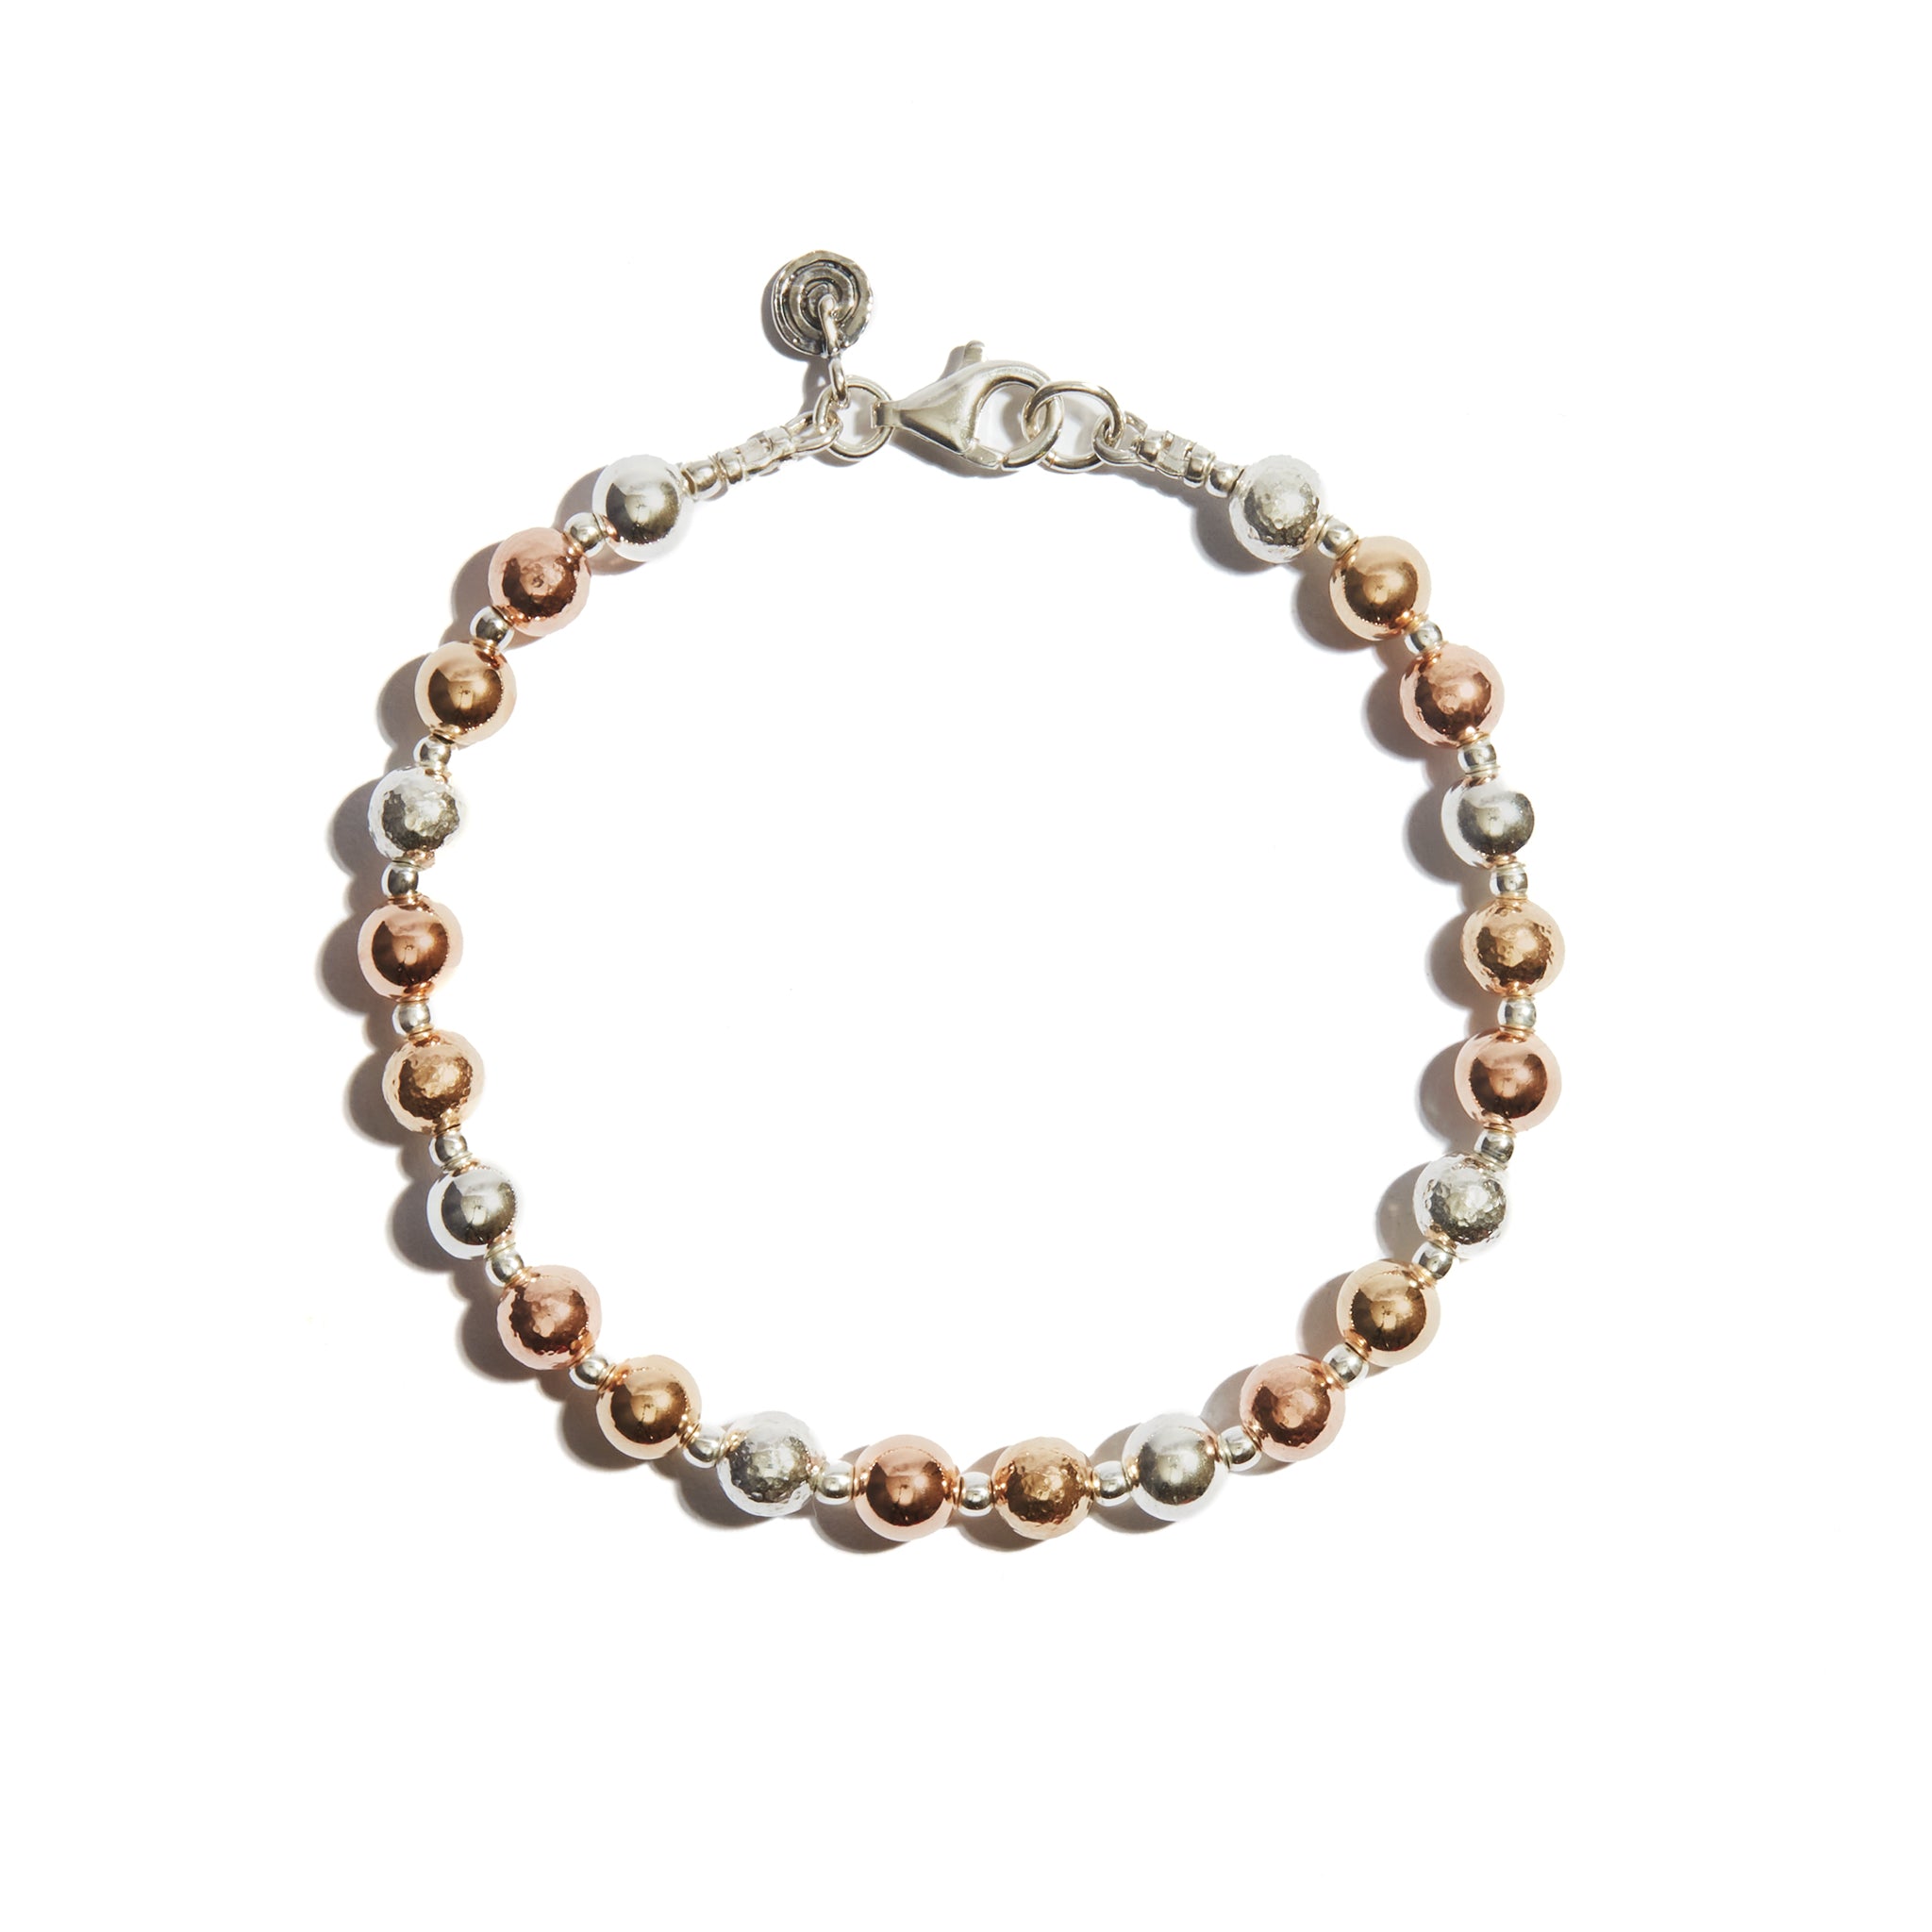 A gorgeous three-tone yellow bracelet crafted from 14ct gold fill balls, featuring a stunning combination of yellow gold, rose gold, and silver for a stylish look.